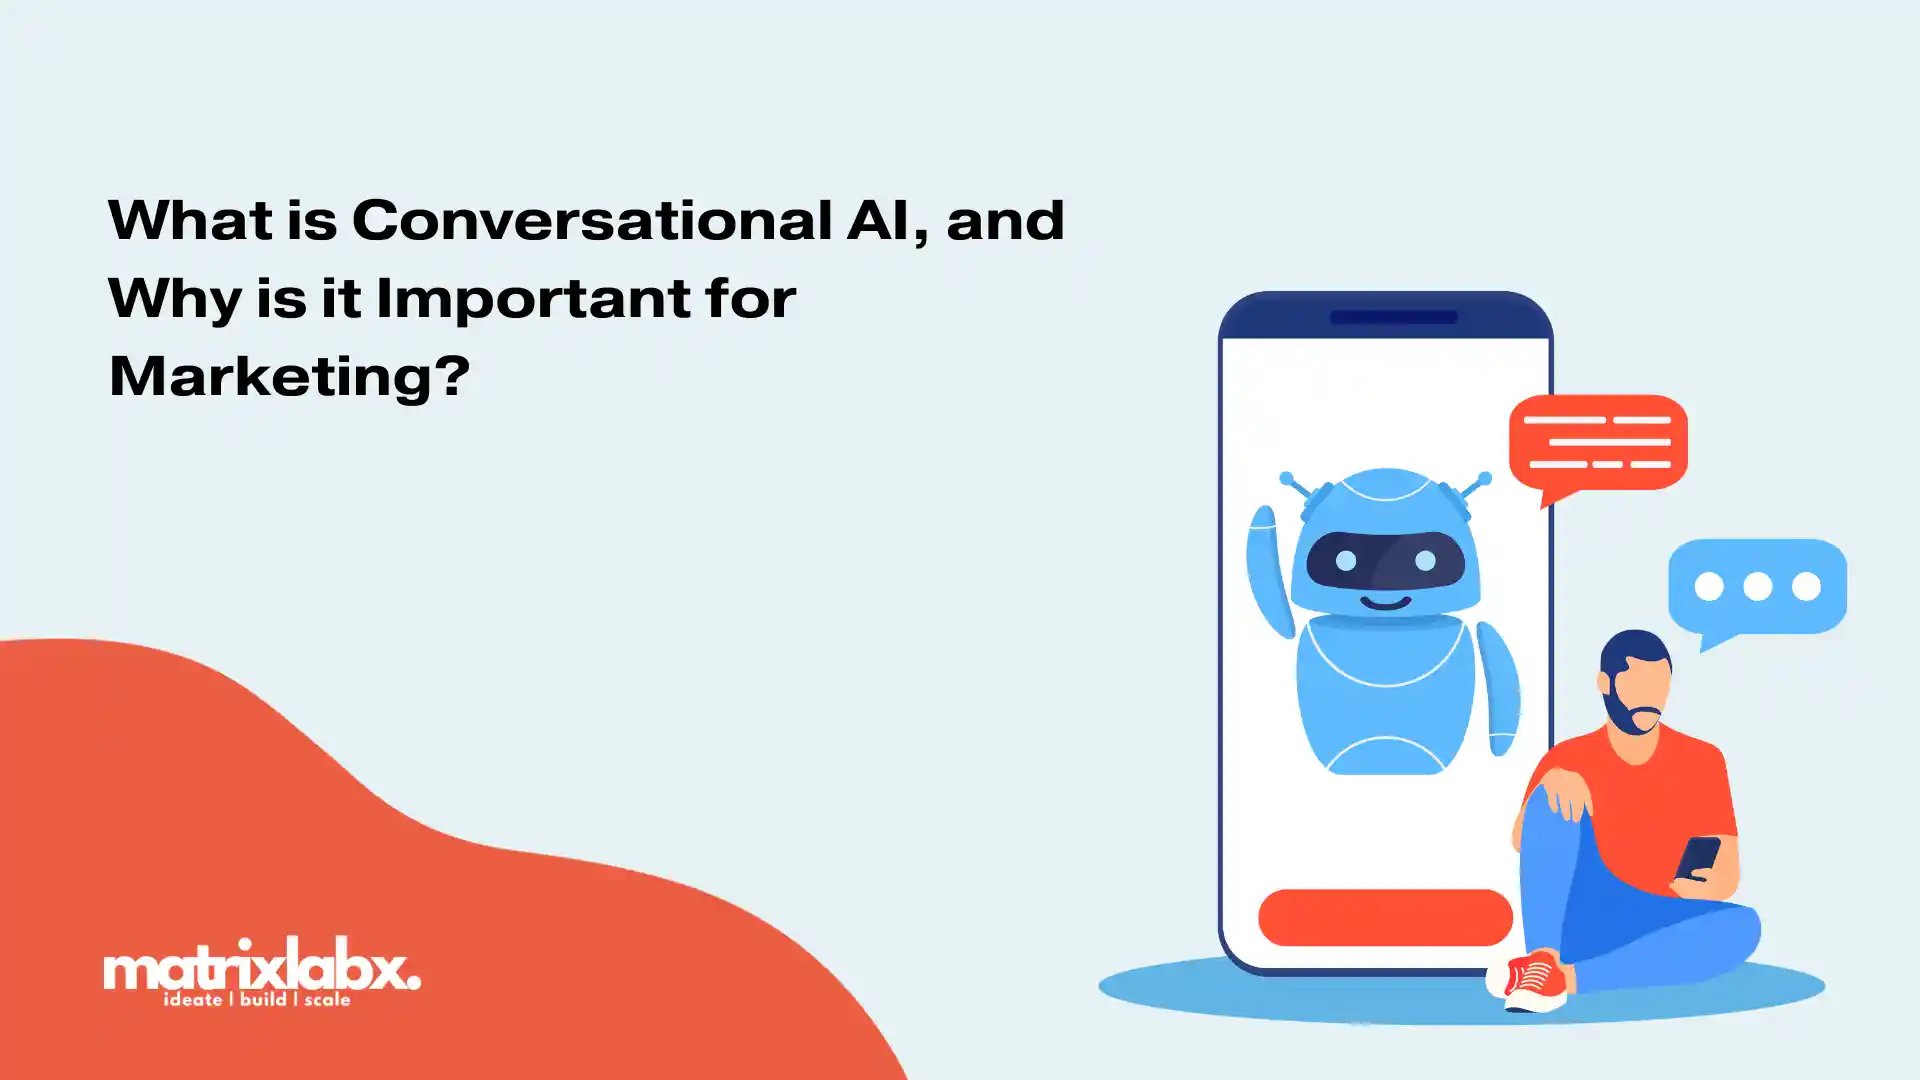 Q4 Product Release: Introducing Digital Engagement, Voice Bot and more